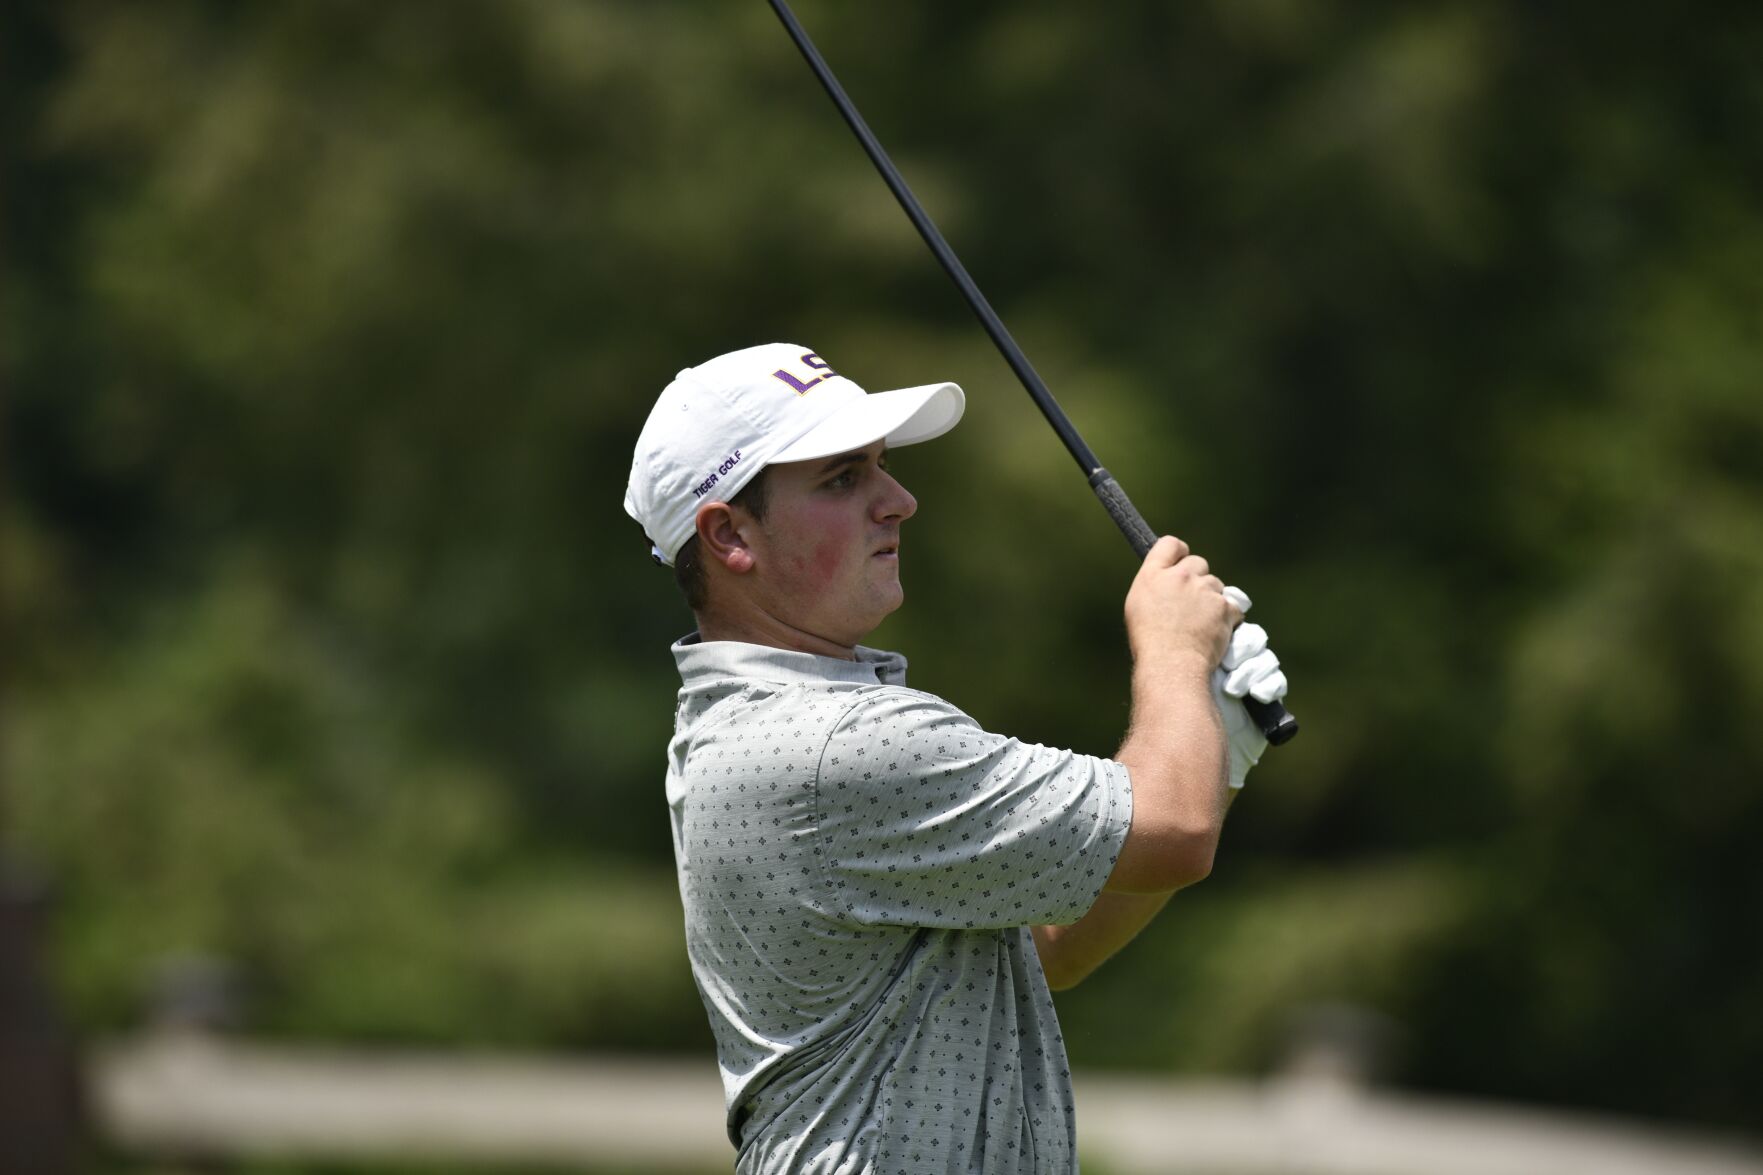 PHOTO GALLERY Louisiana State golfer shoots 7-under on back nine to move into contention Sports tribdem pic